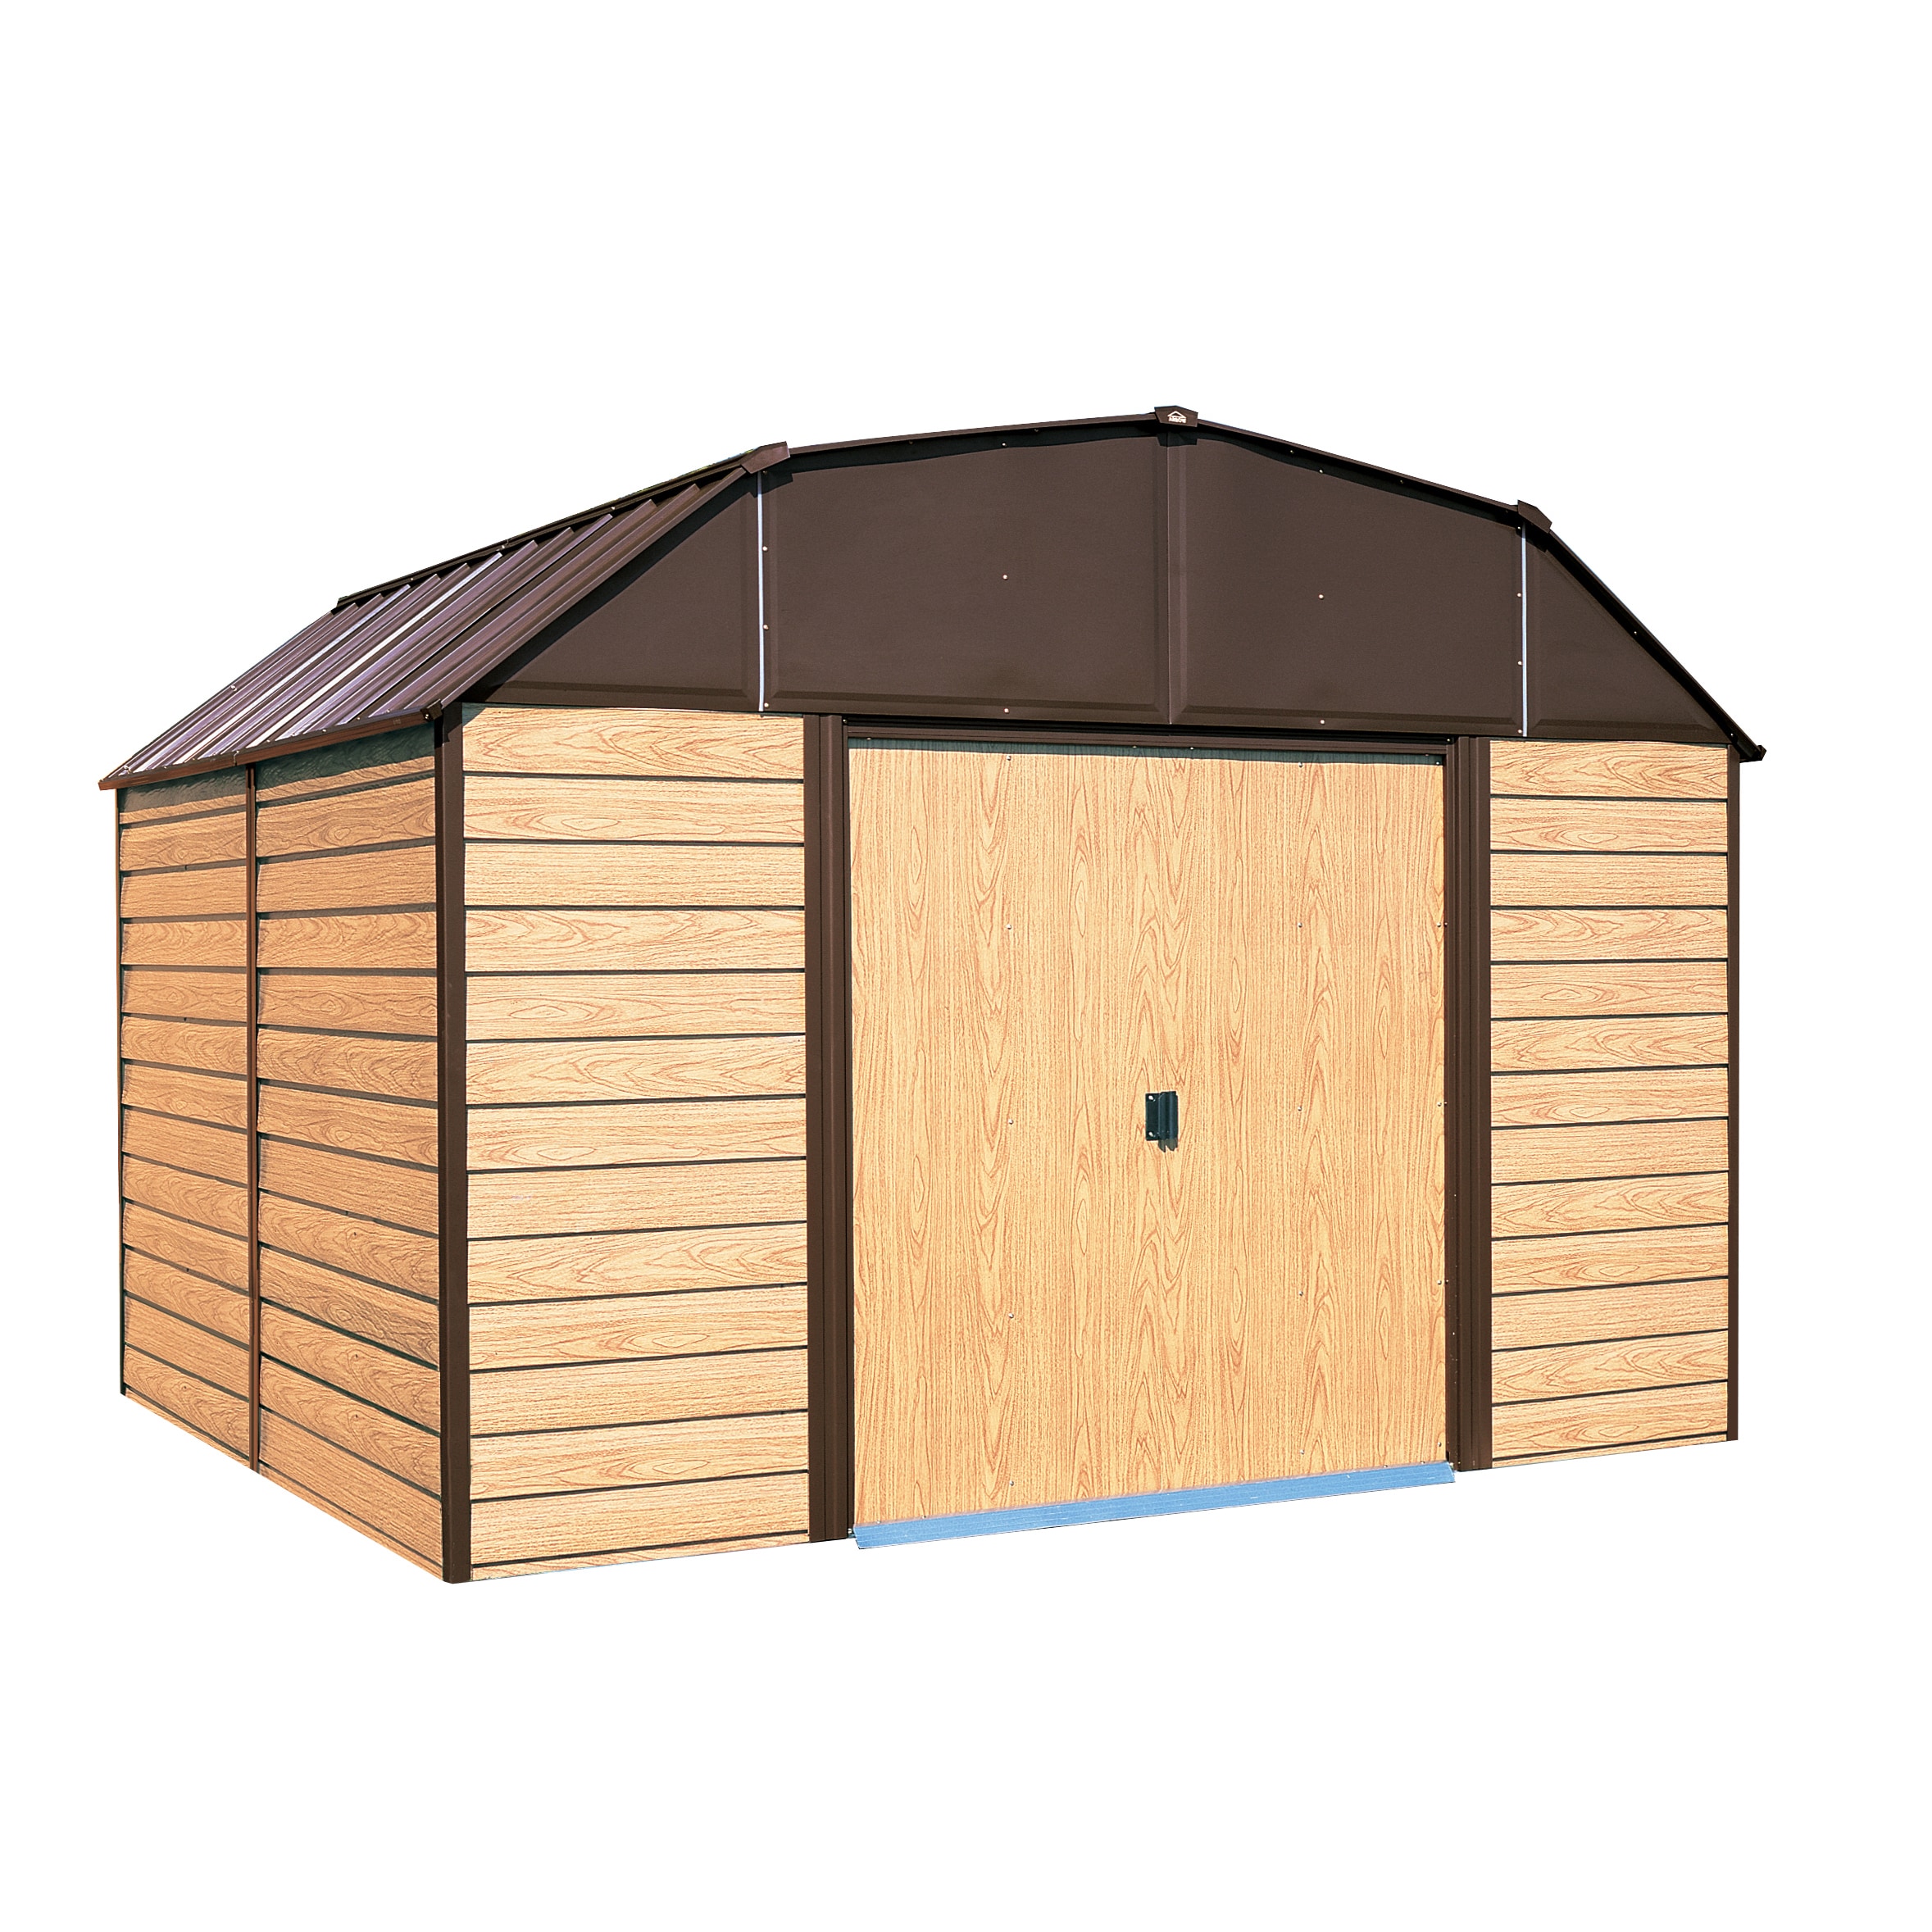 Arrow Woodhaven 10x14 foot Storage Shed   Shopping   The